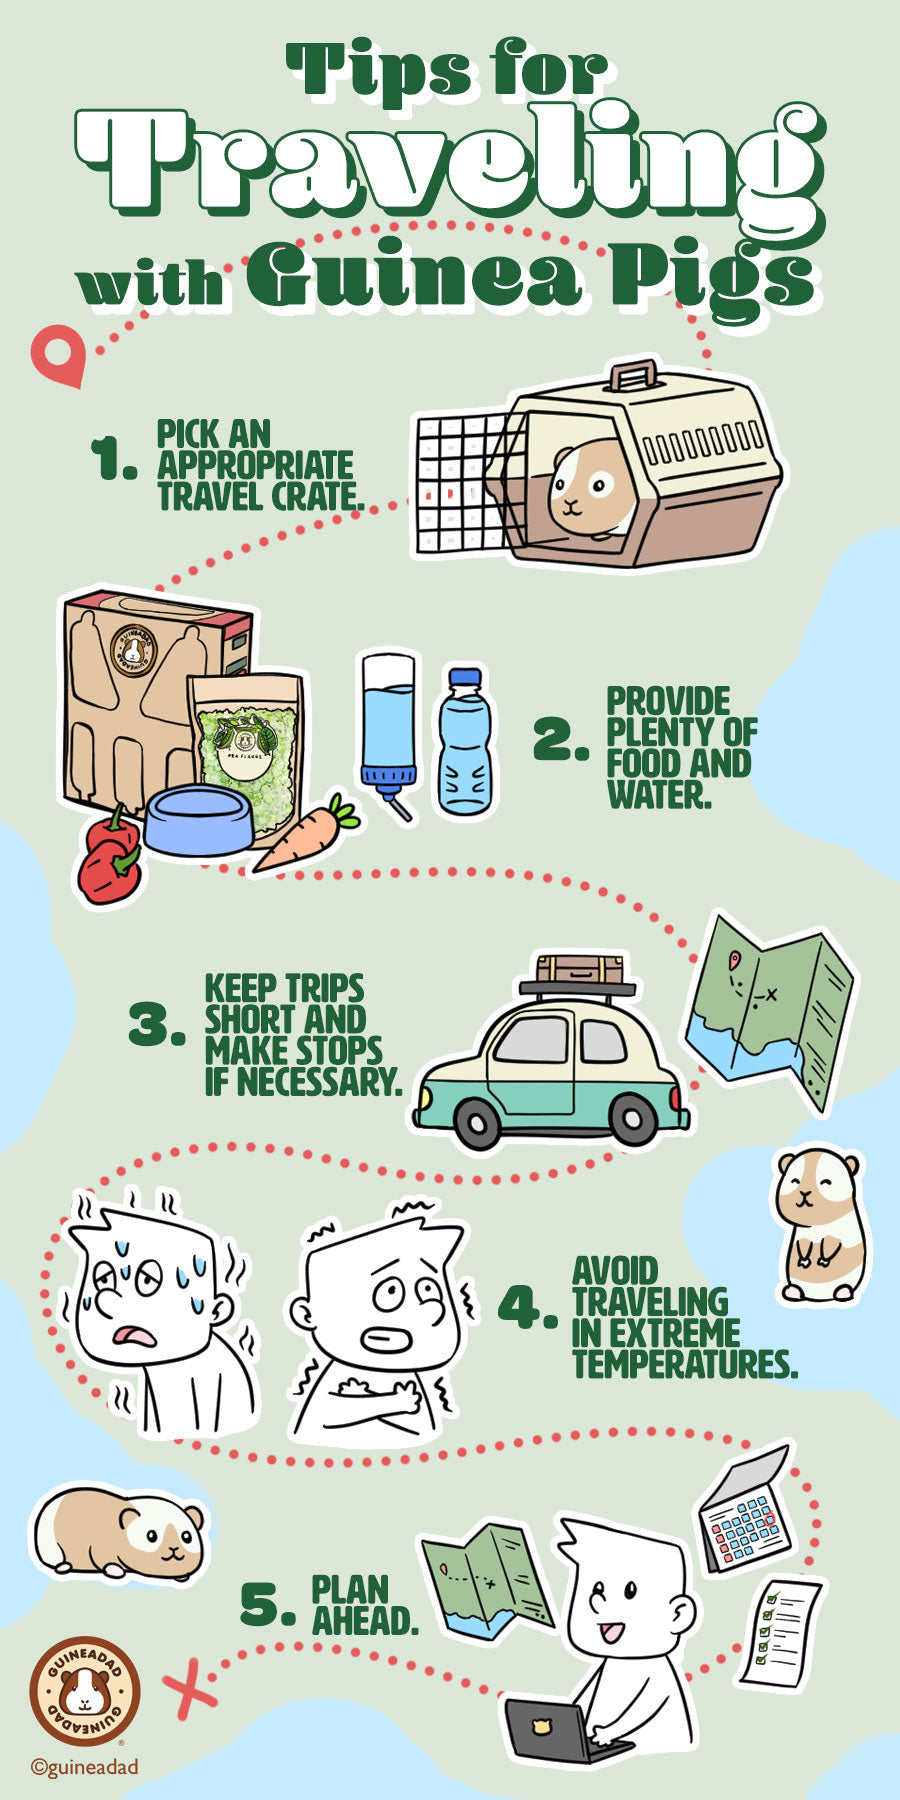 Traveling Tips with Guinea Pigs